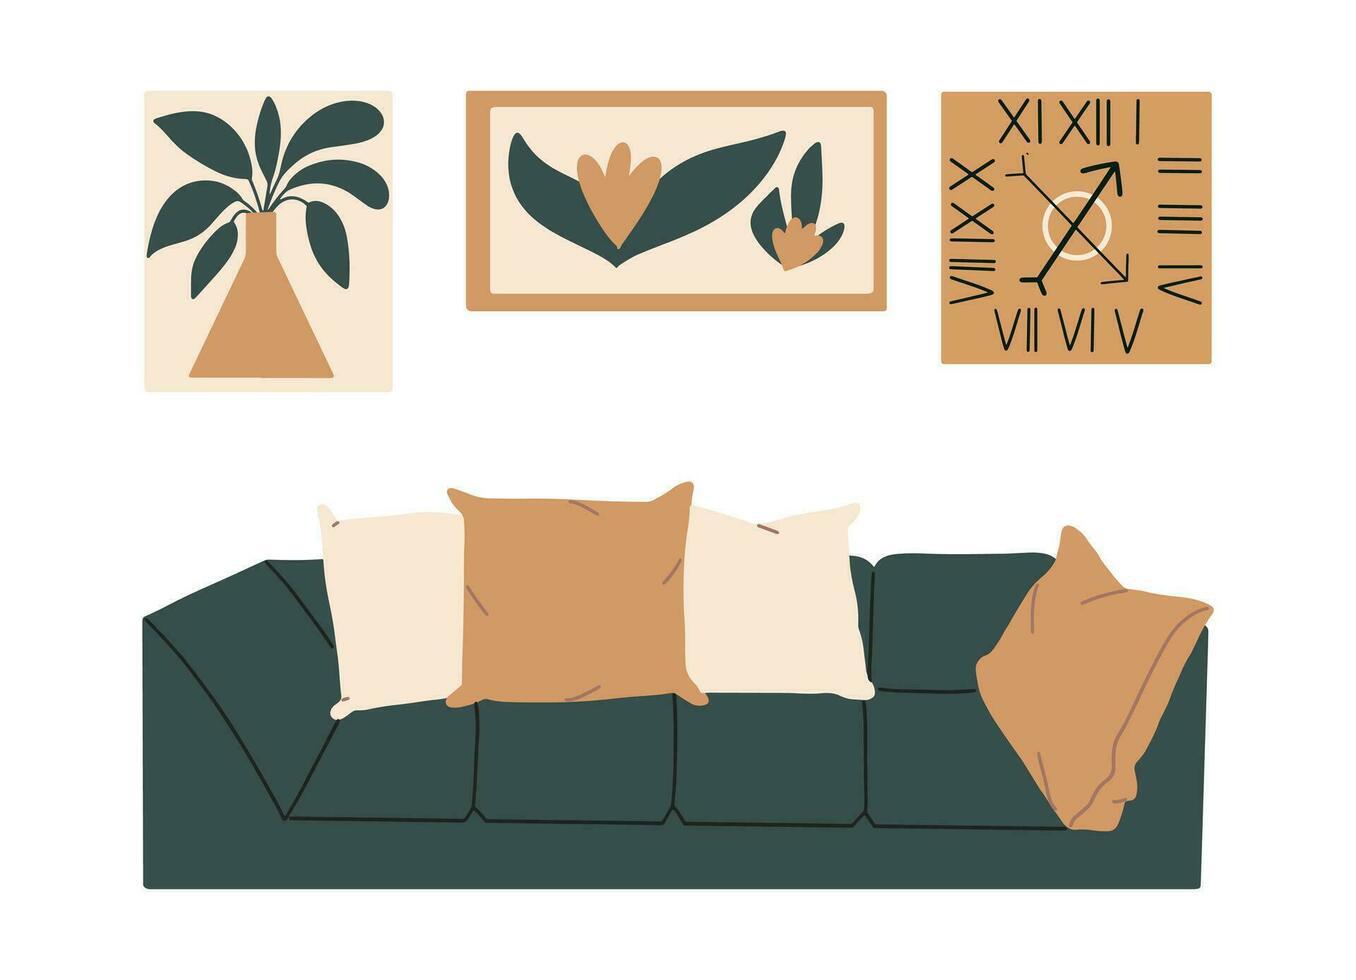 Modern interior design in Scandinavian style. Sofa with pillows and paintings. Living room. Vector illustration.